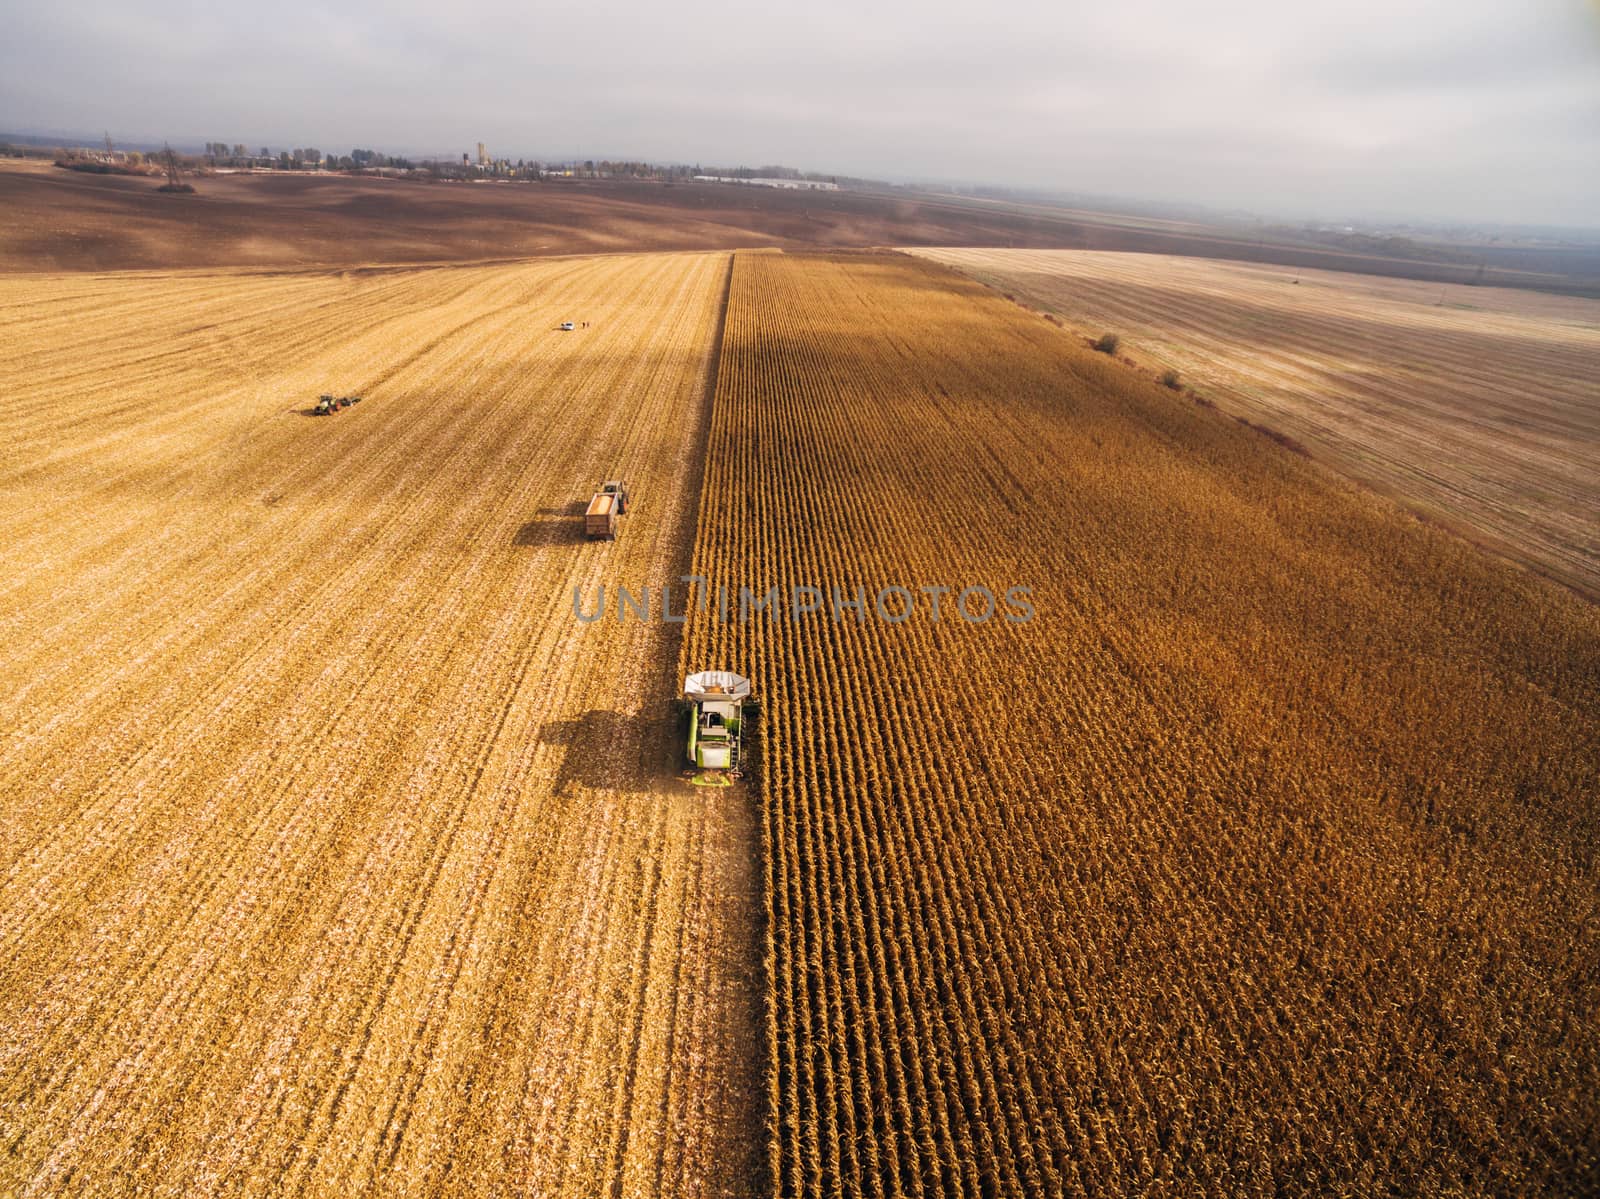 Harvesting Corn in the Green Big Field. Aerial View over Automated Combines by TrEKone